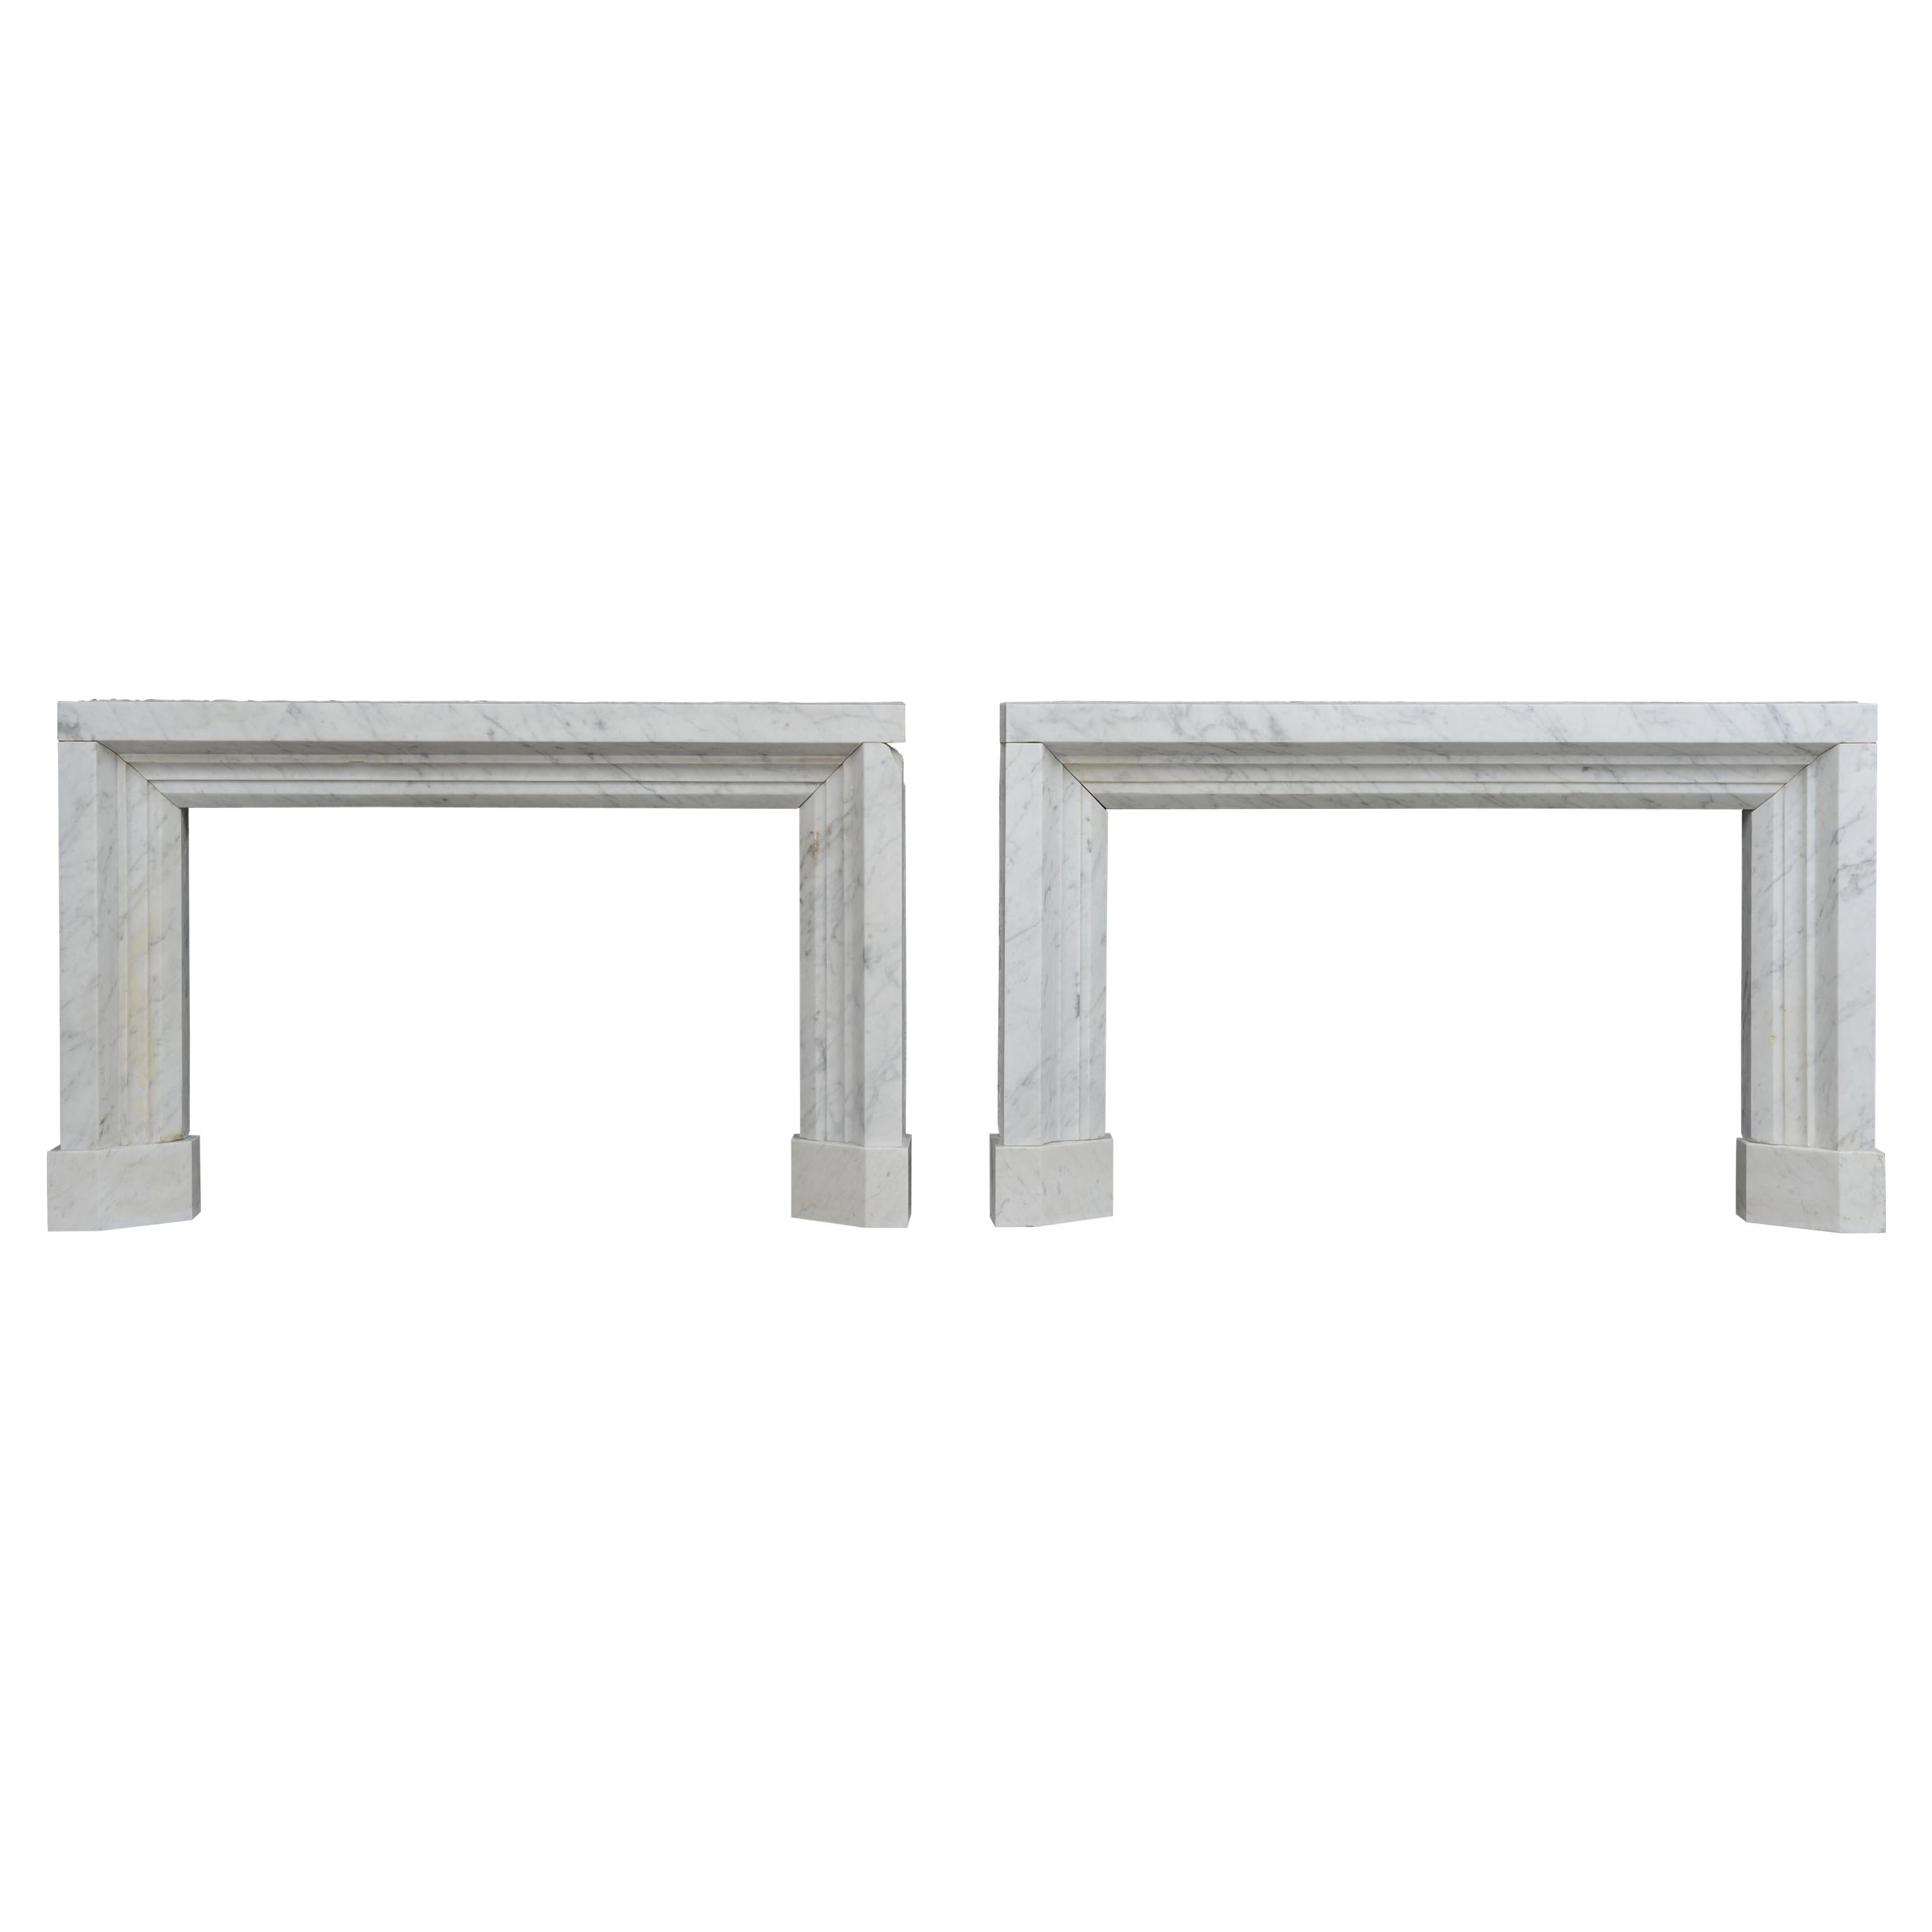 Pair of White Marble Bolections / Profiled Fireplace Mantels